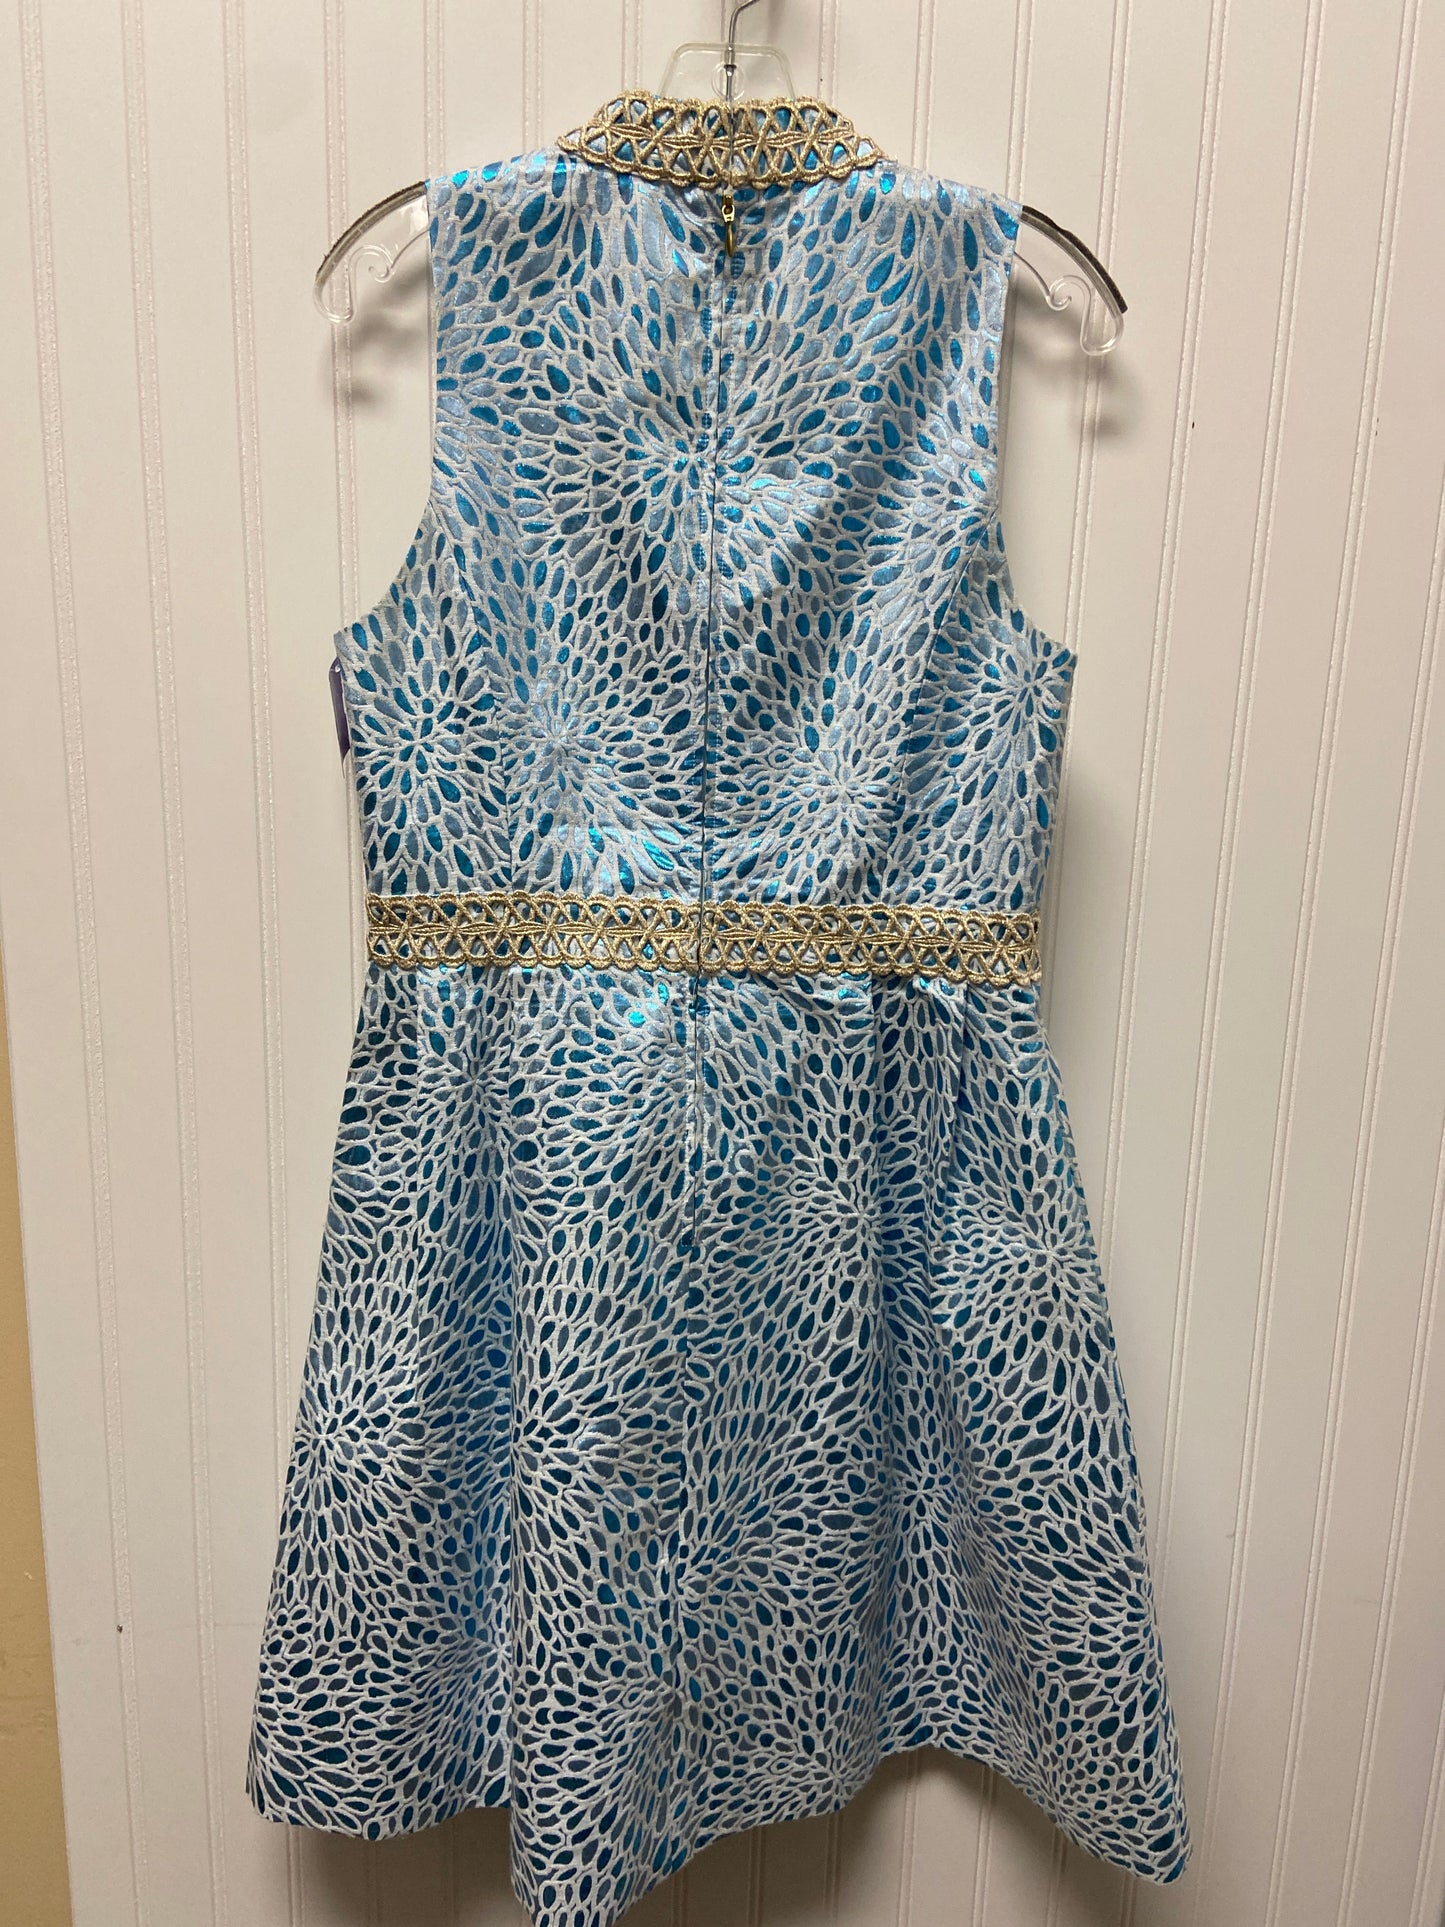 Blue Dress Party Midi Lilly Pulitzer, Size 8